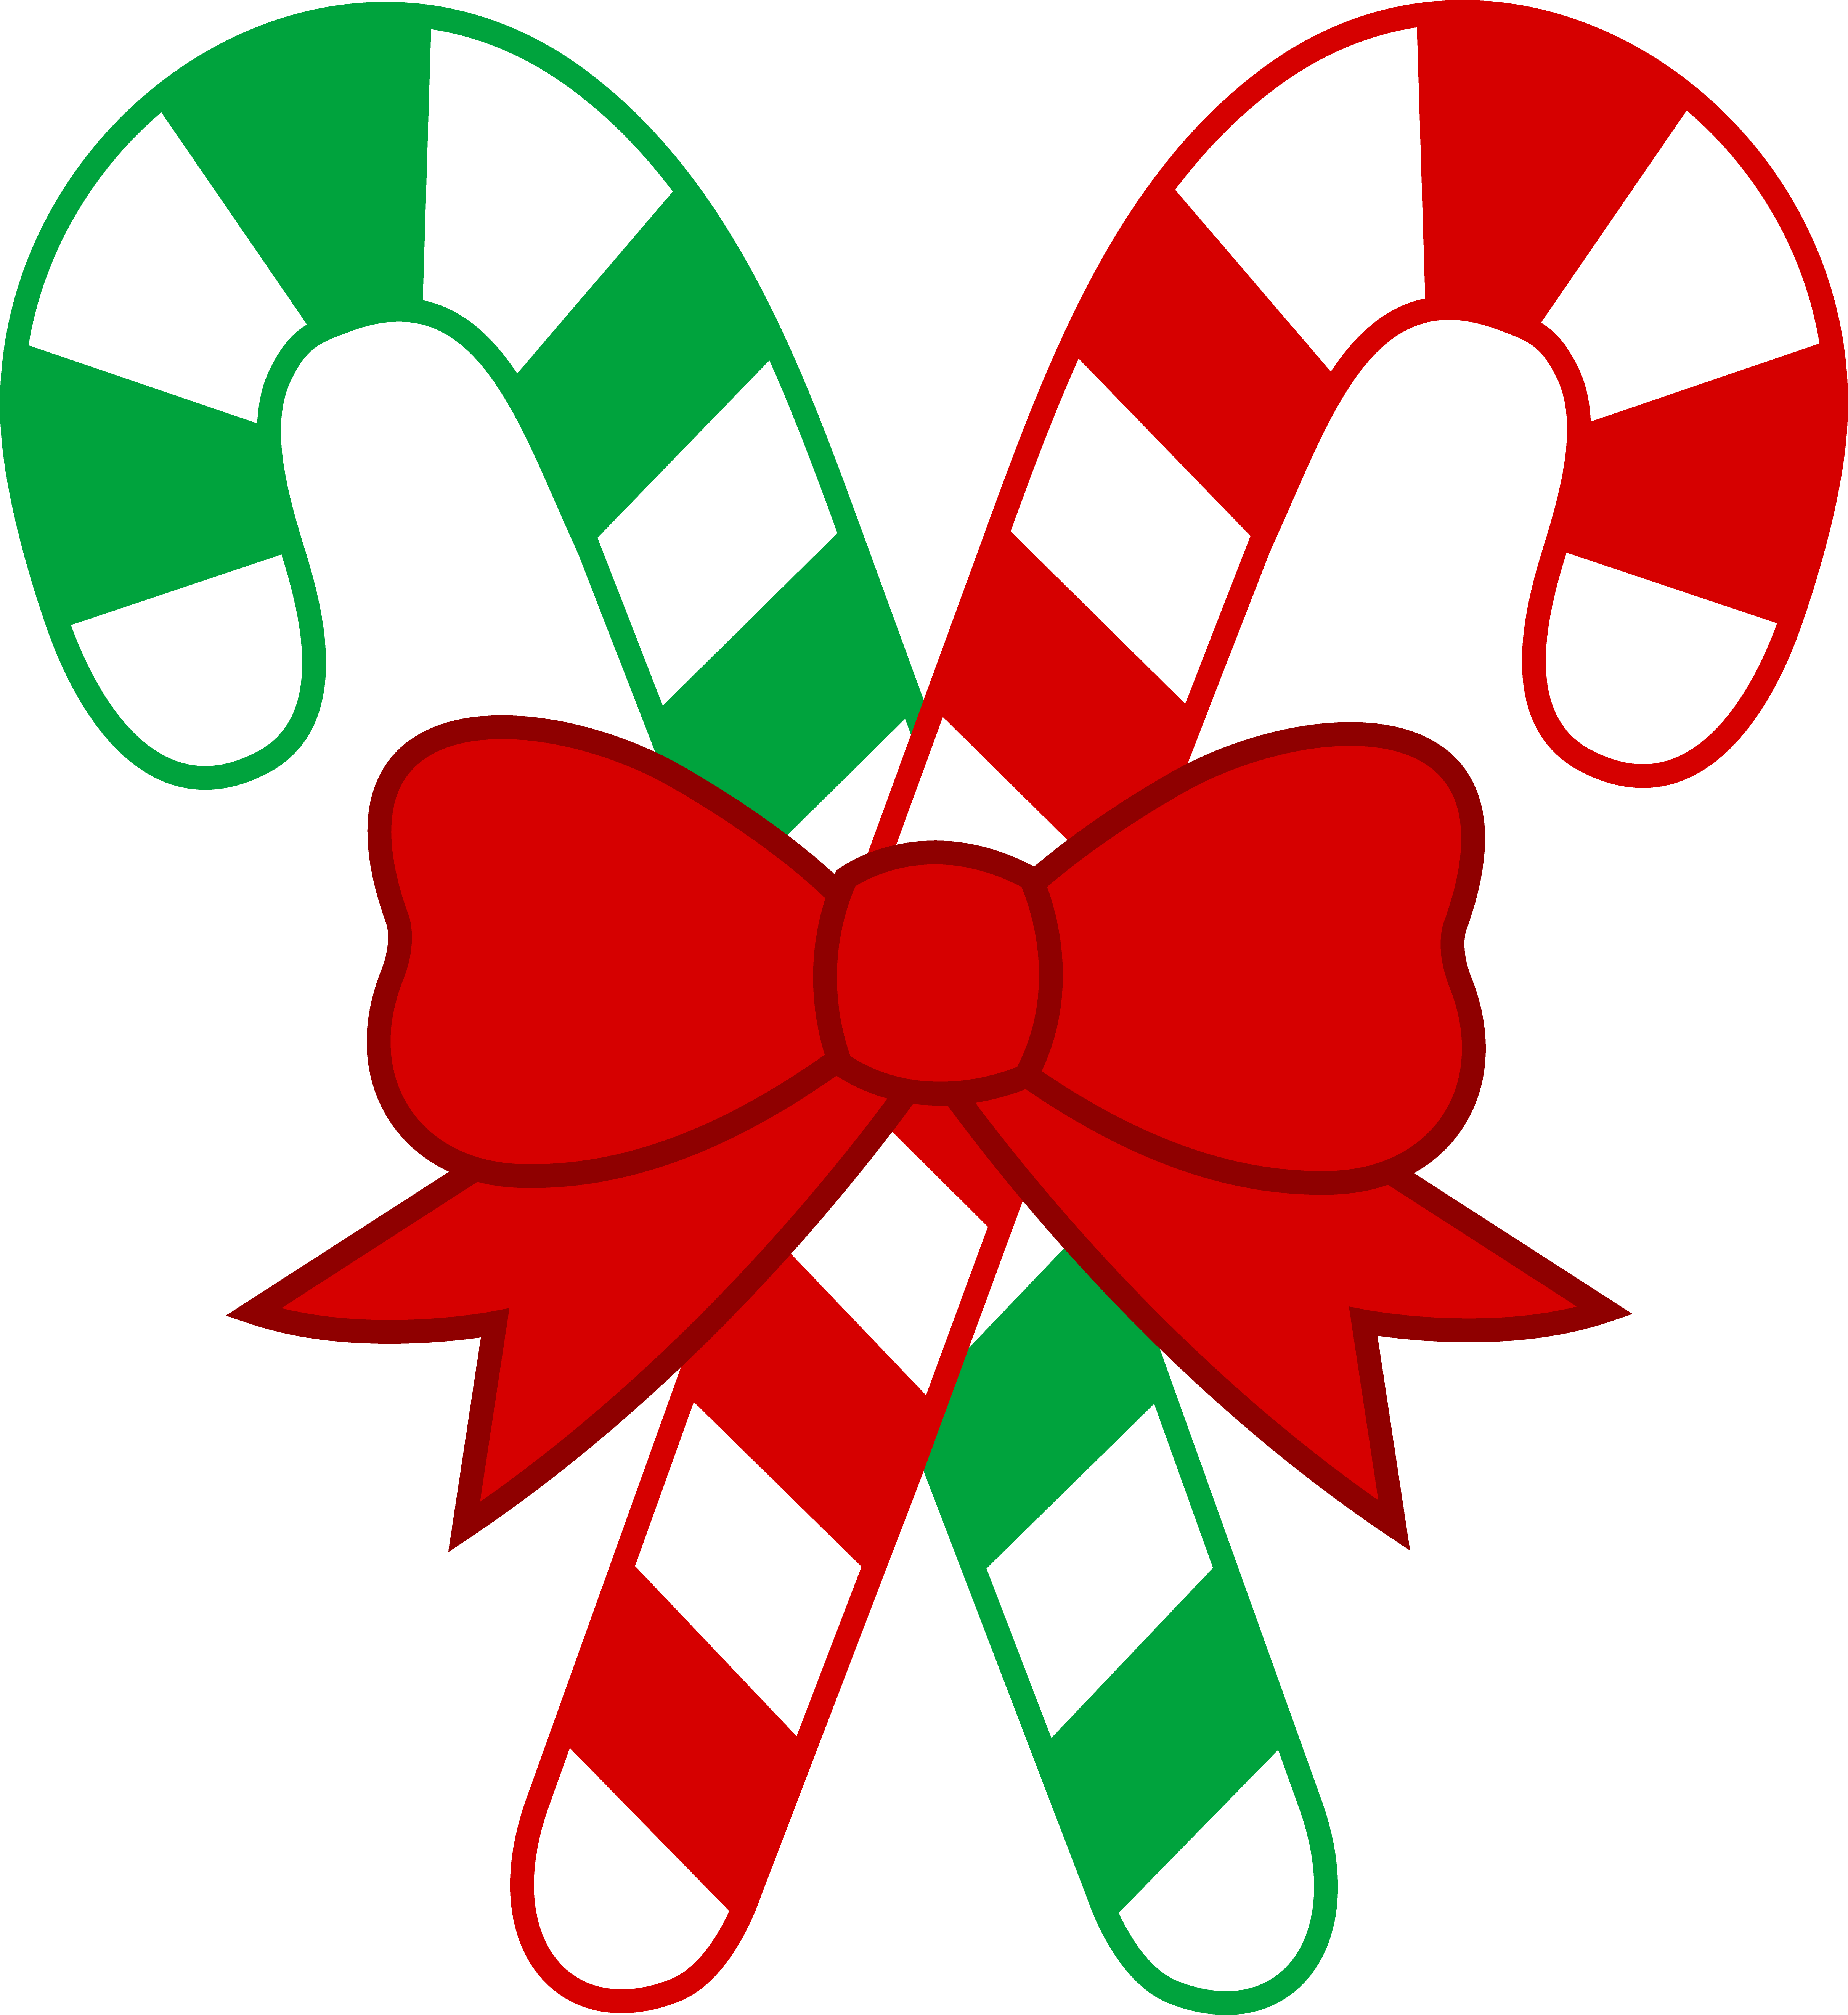 holiday clipart free